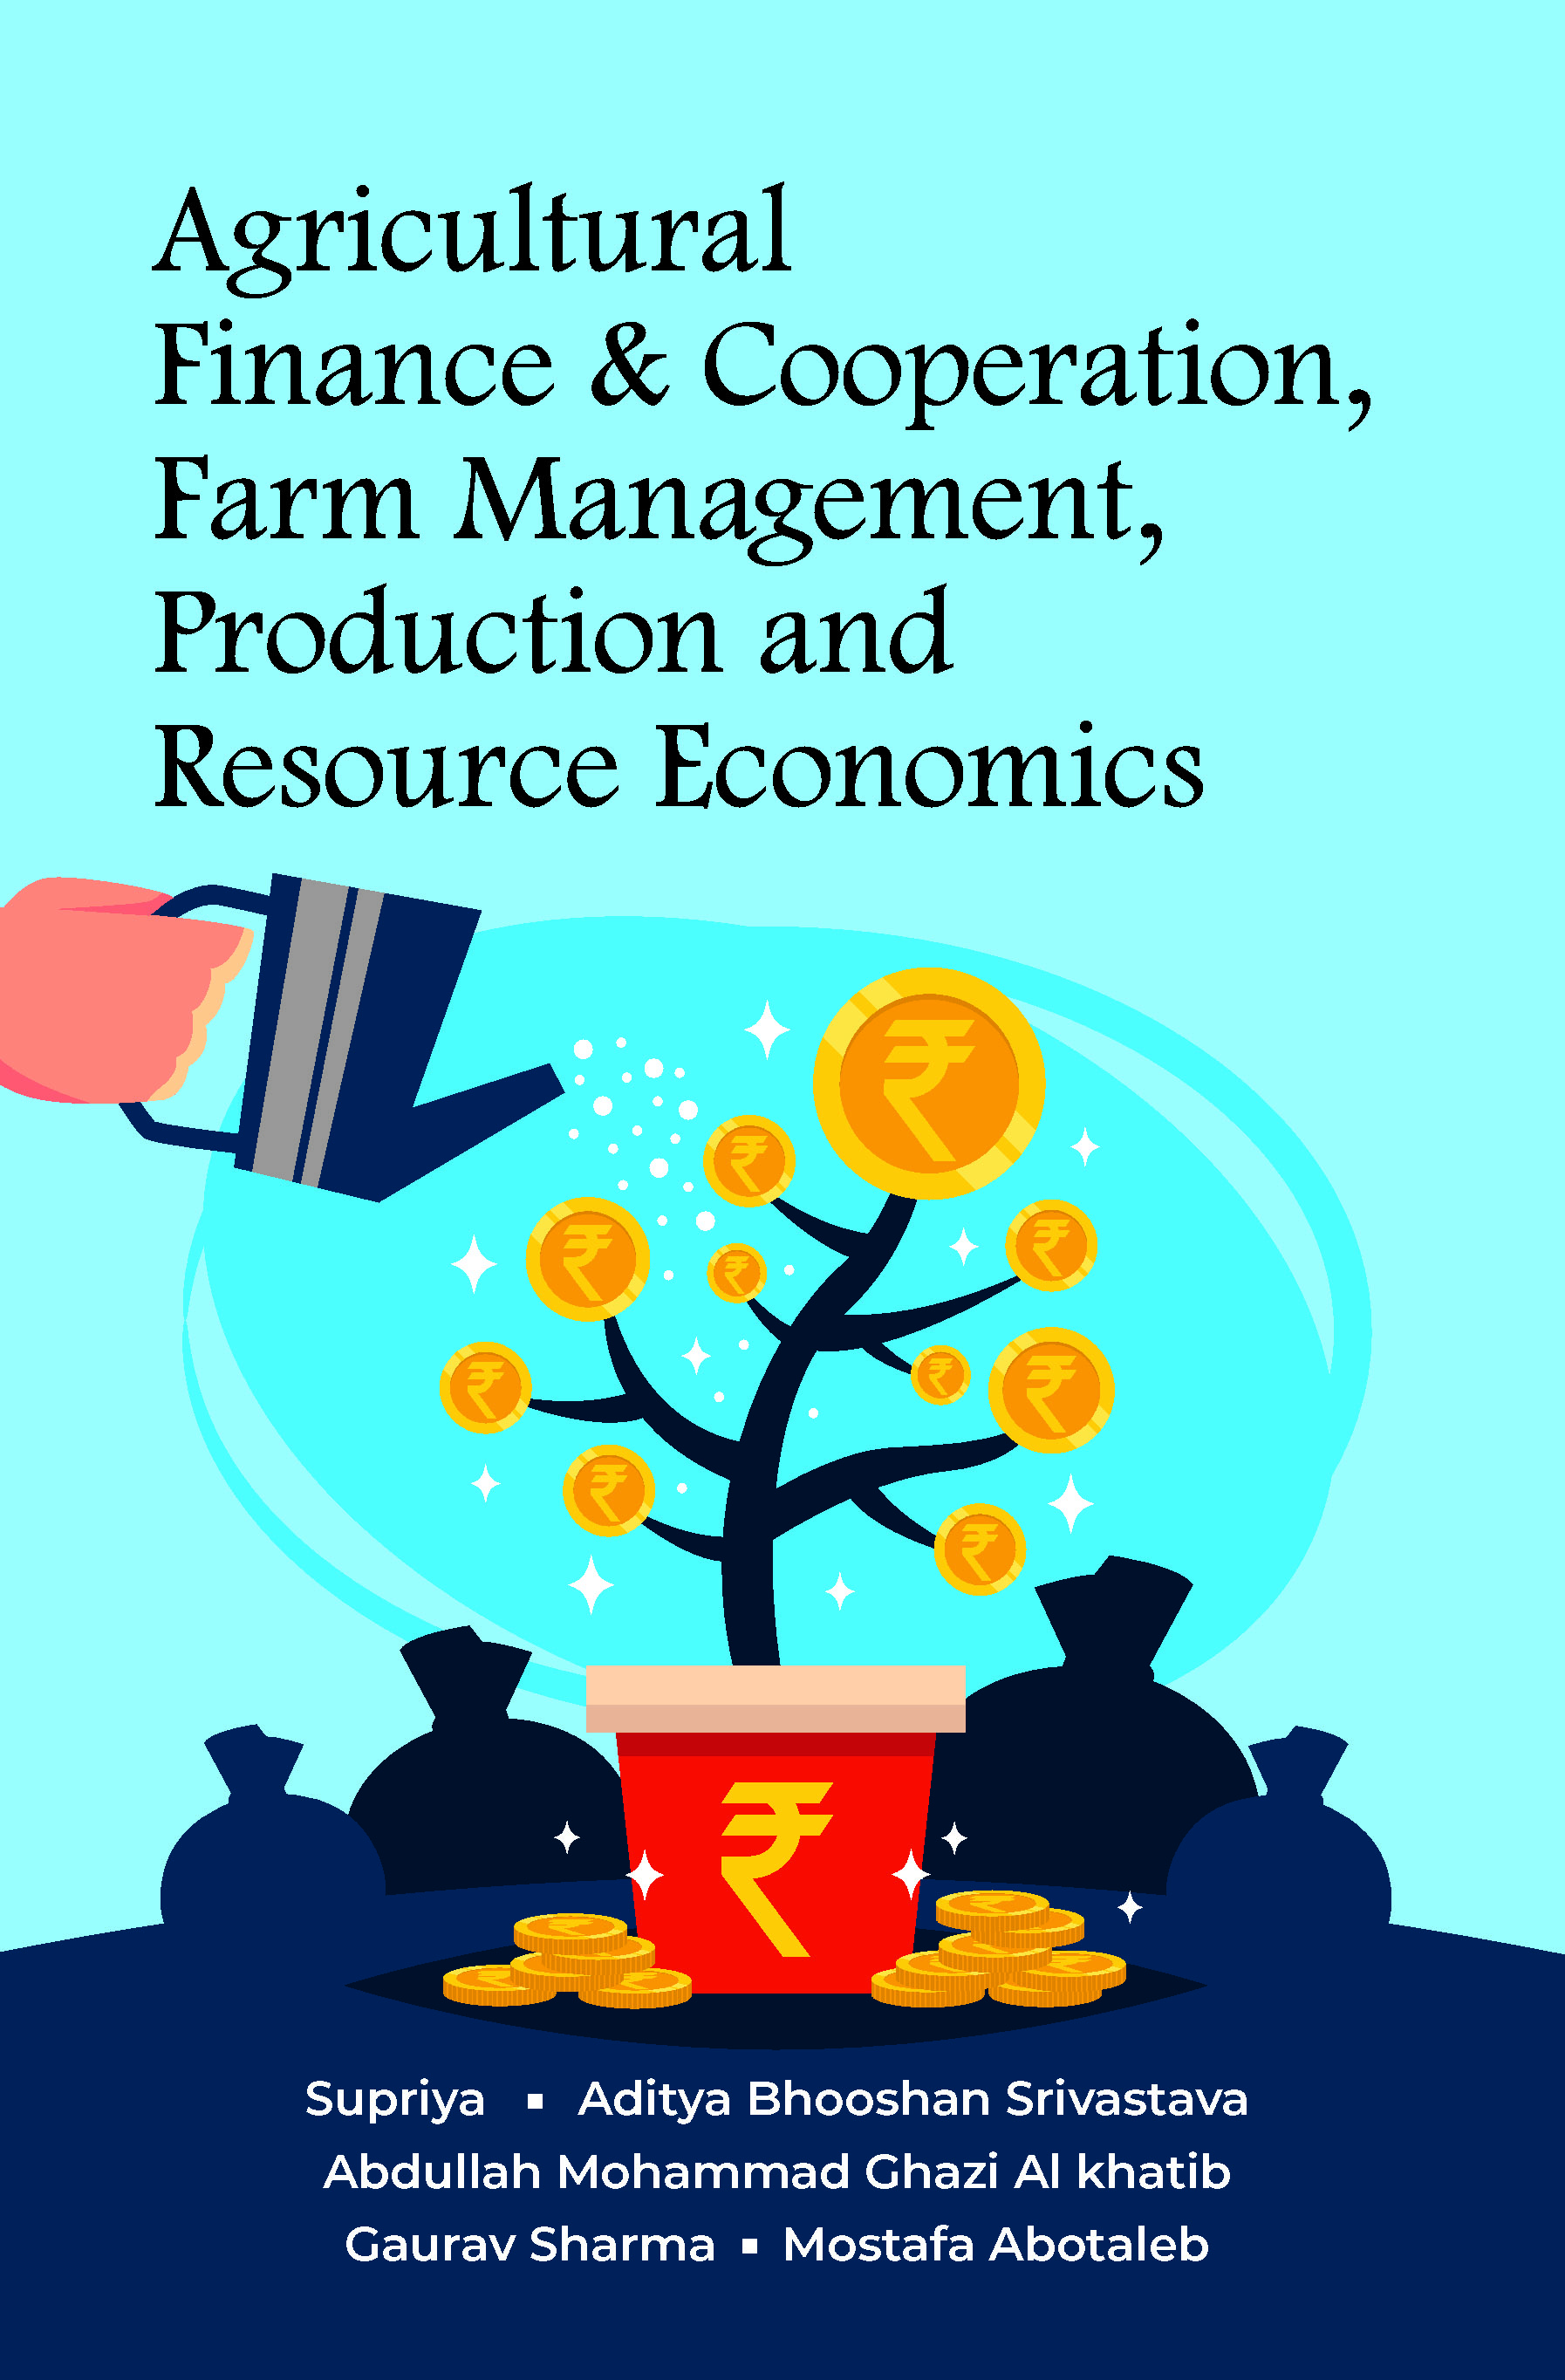 Agricultural Finance & Cooperation, Farm Management, Production and Resource Economics